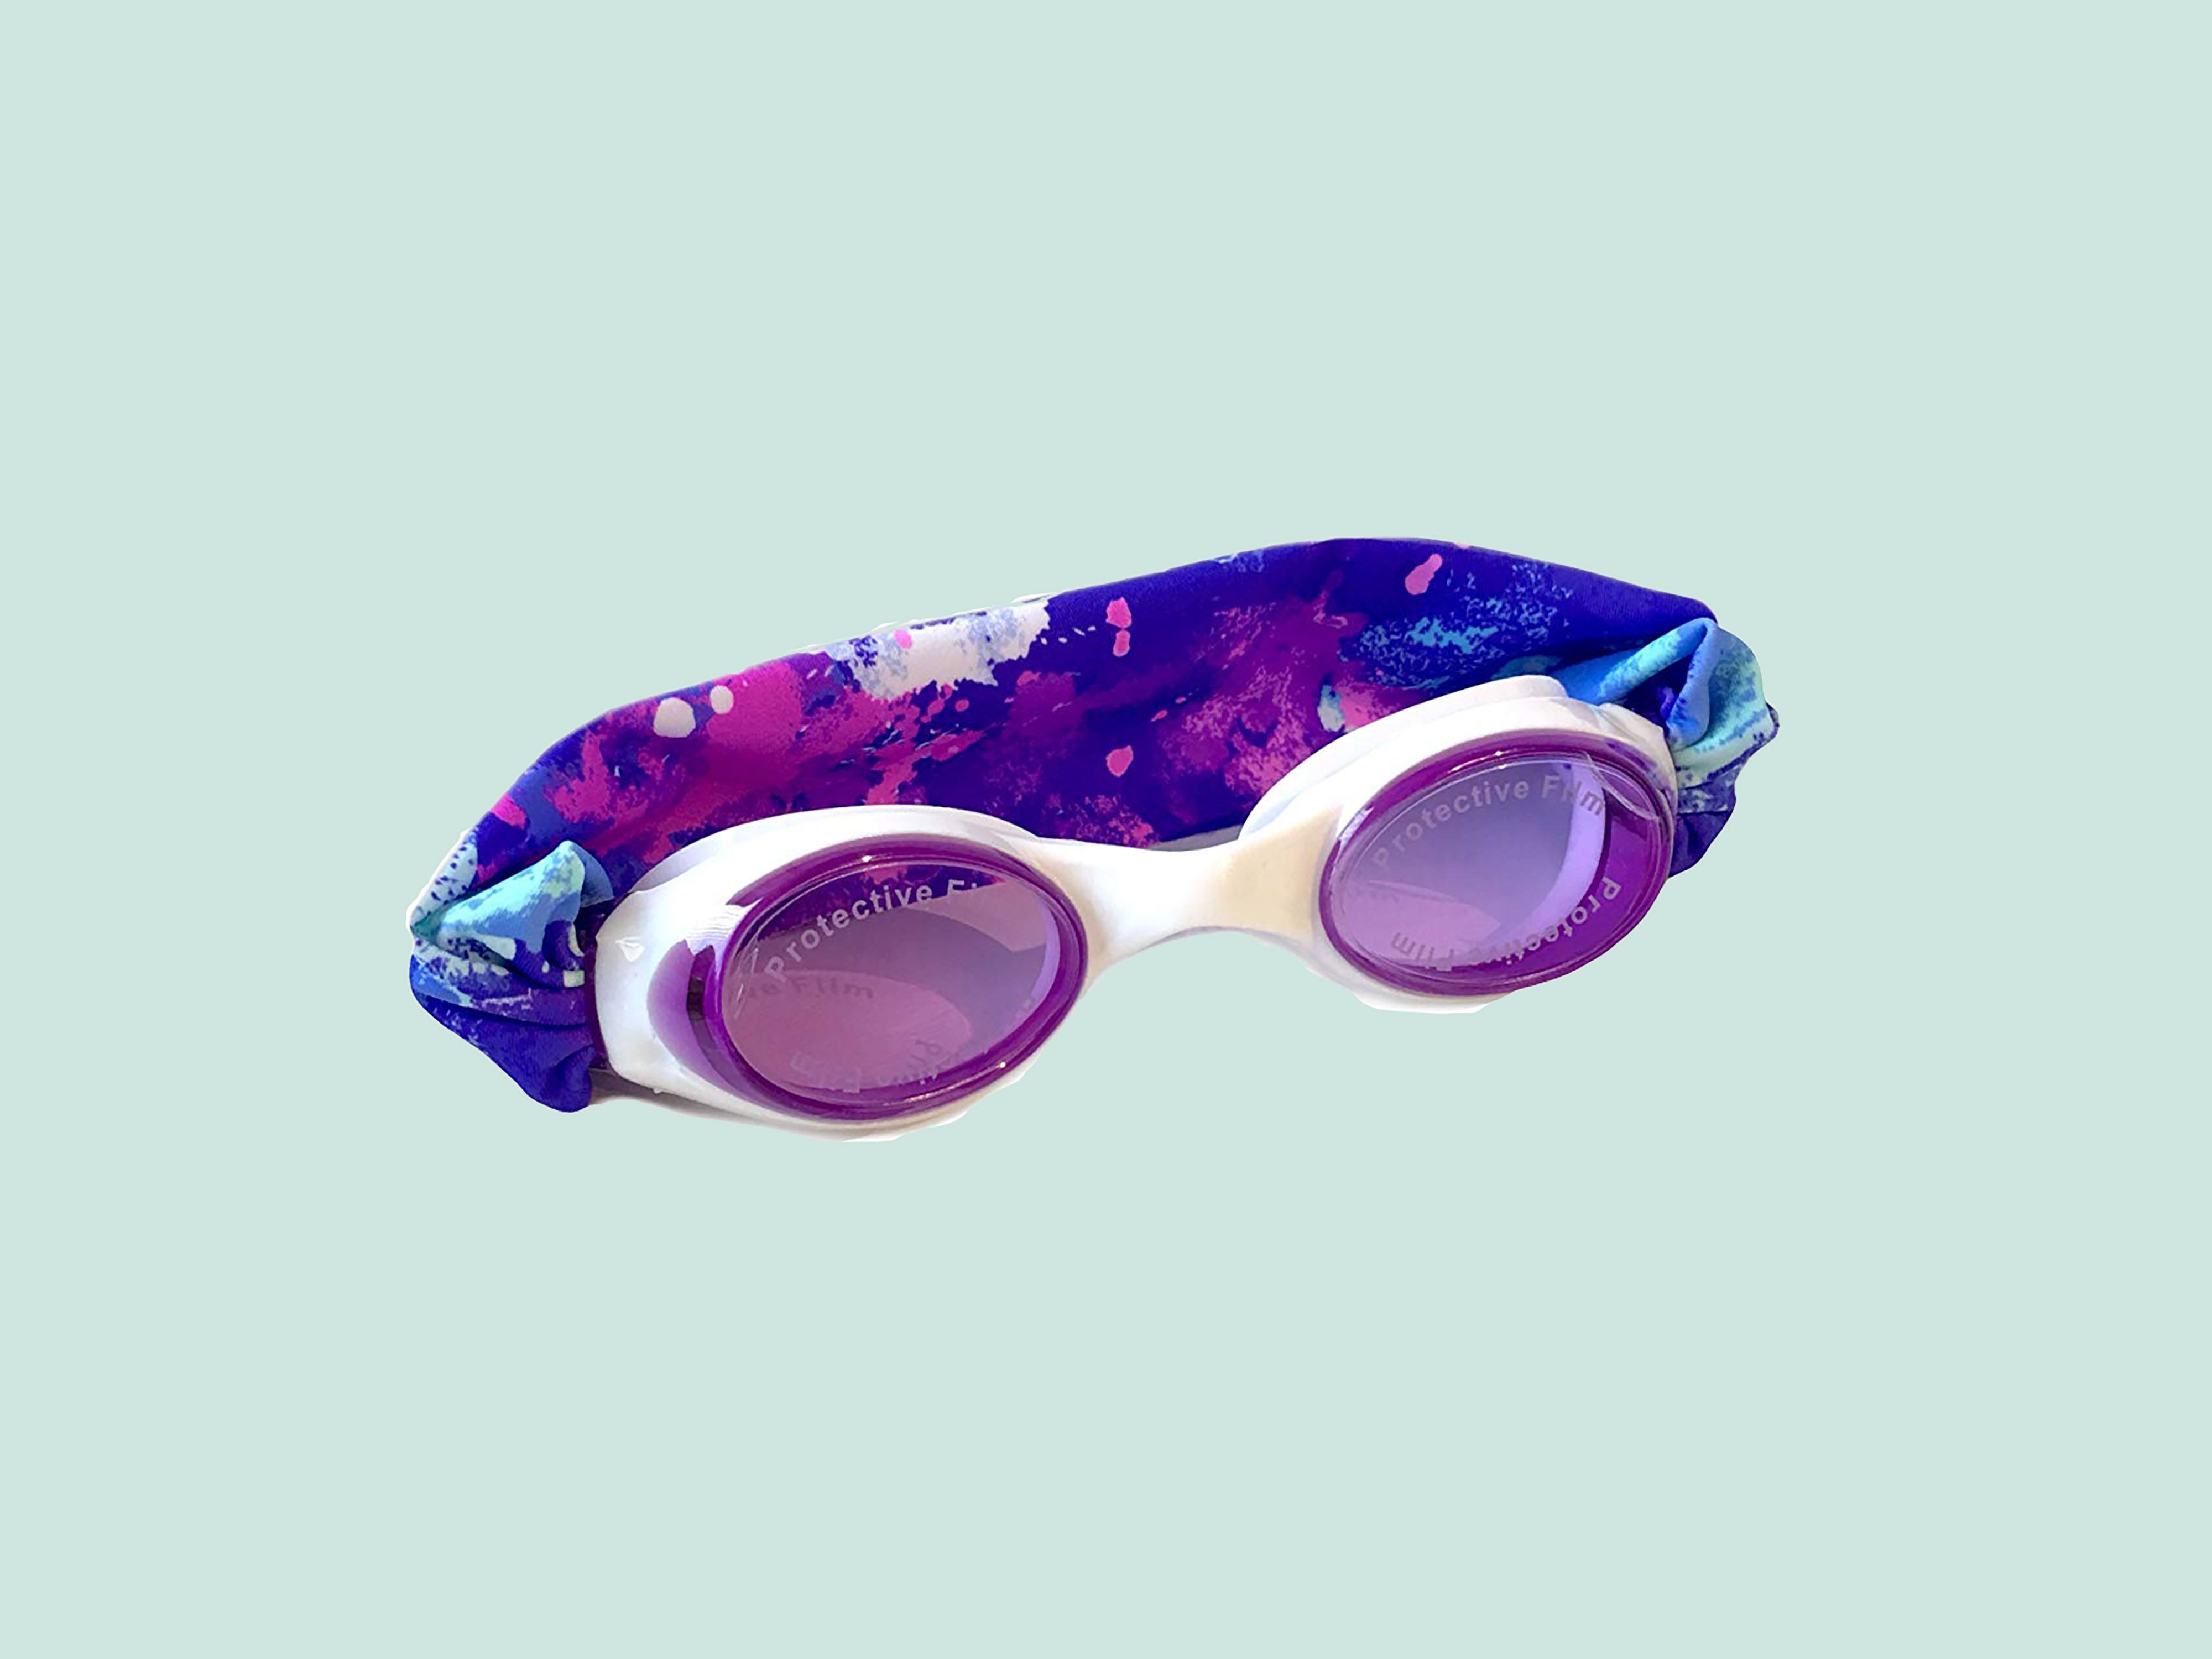 Easy to Use Fits Kids & Adults Patent Pending Splash “Royal” Swim Goggles Fun Fashionable Comfortable Wont Pull Your Hair High Visibility Anti-Fog Lenses 